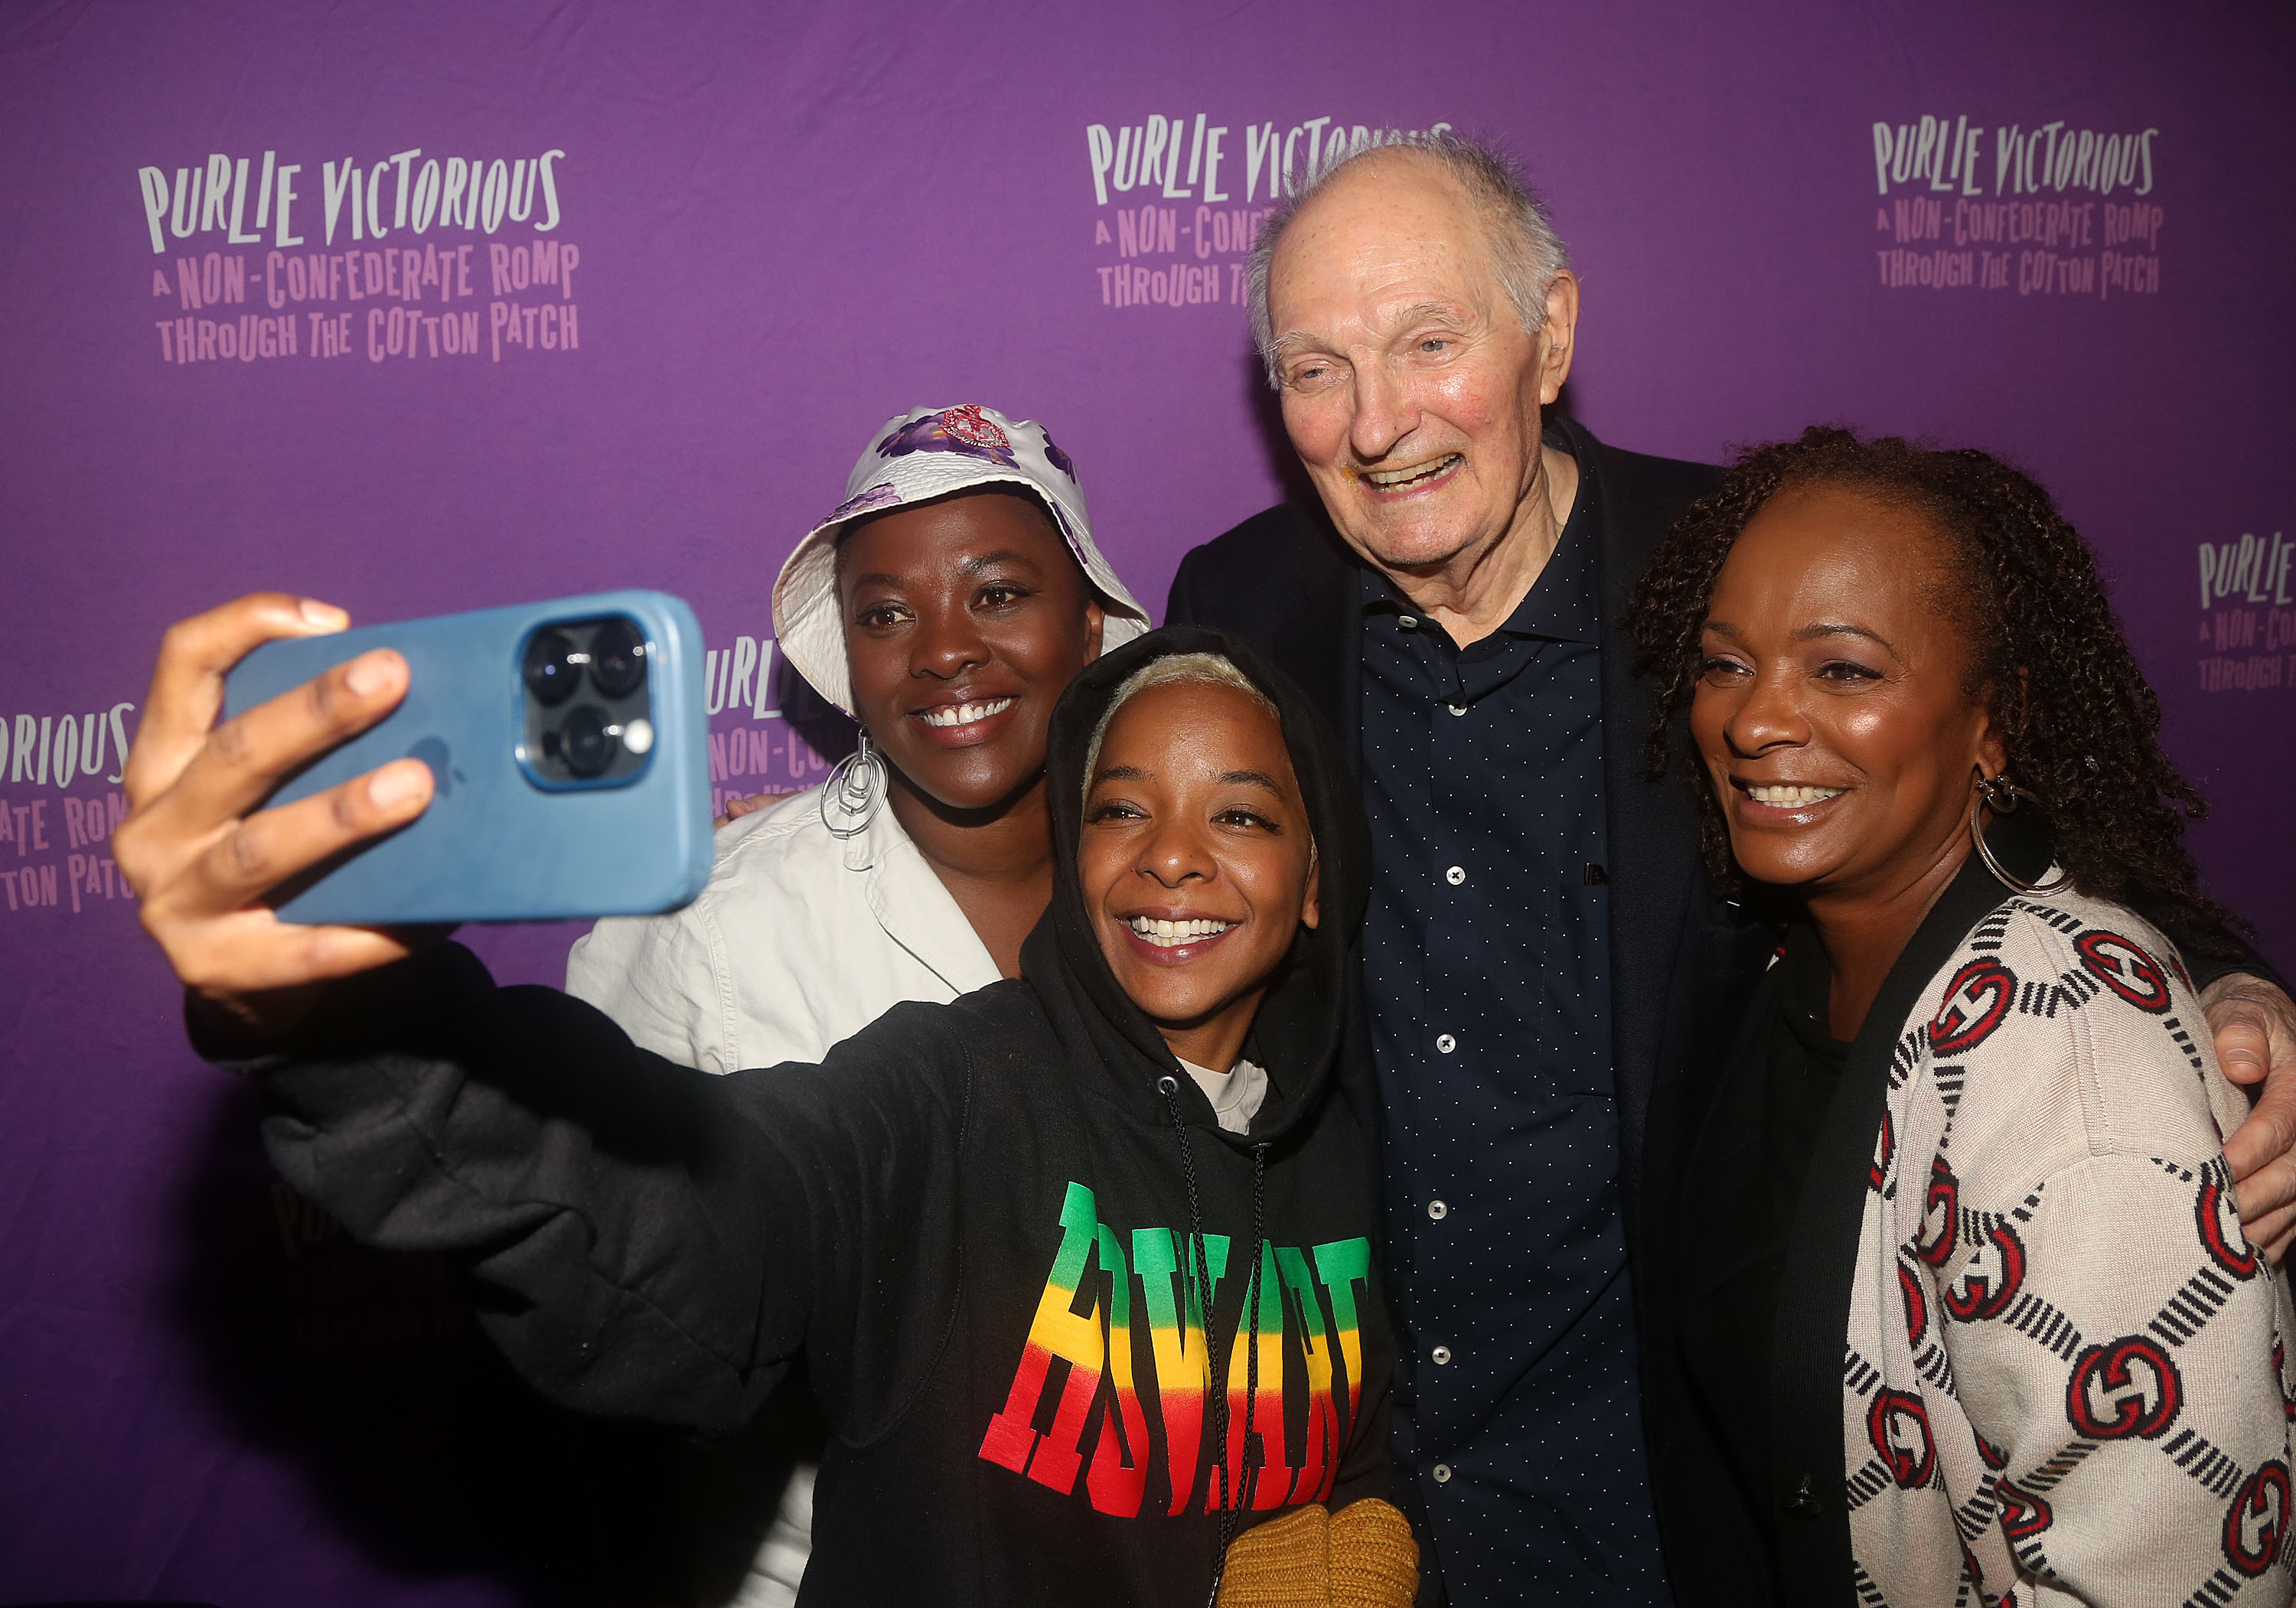 Heather Alicia Simms, Kara Young, Alan Alda, and Vanessa Bell Calloway pose backstage at the play "Purlie Victorious" on Broadway, at The Music Box Theater, on October 3, 2023 in New York City. | Source: Getty Images